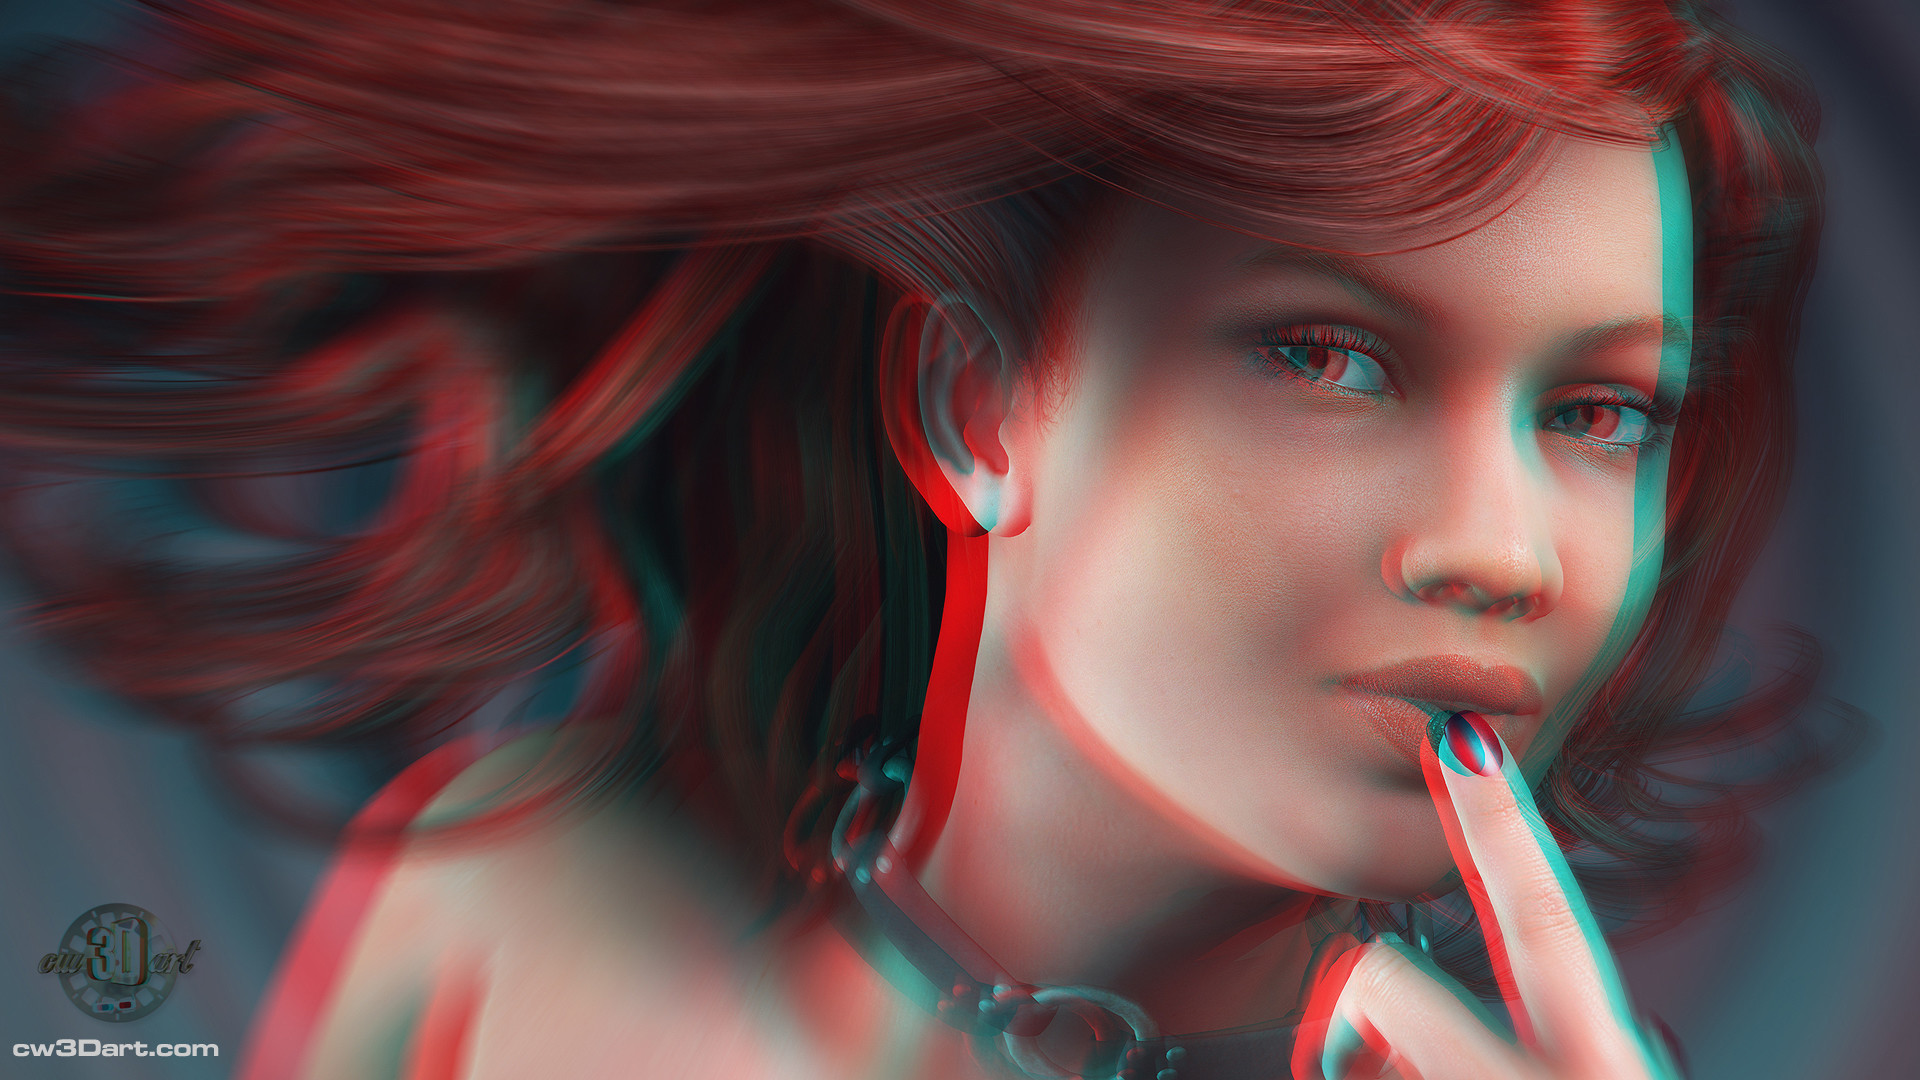 1920x1080 ... Wallpapers - HD Anaglyph (Red/Cyan) 3D glasses test - YouTube ...